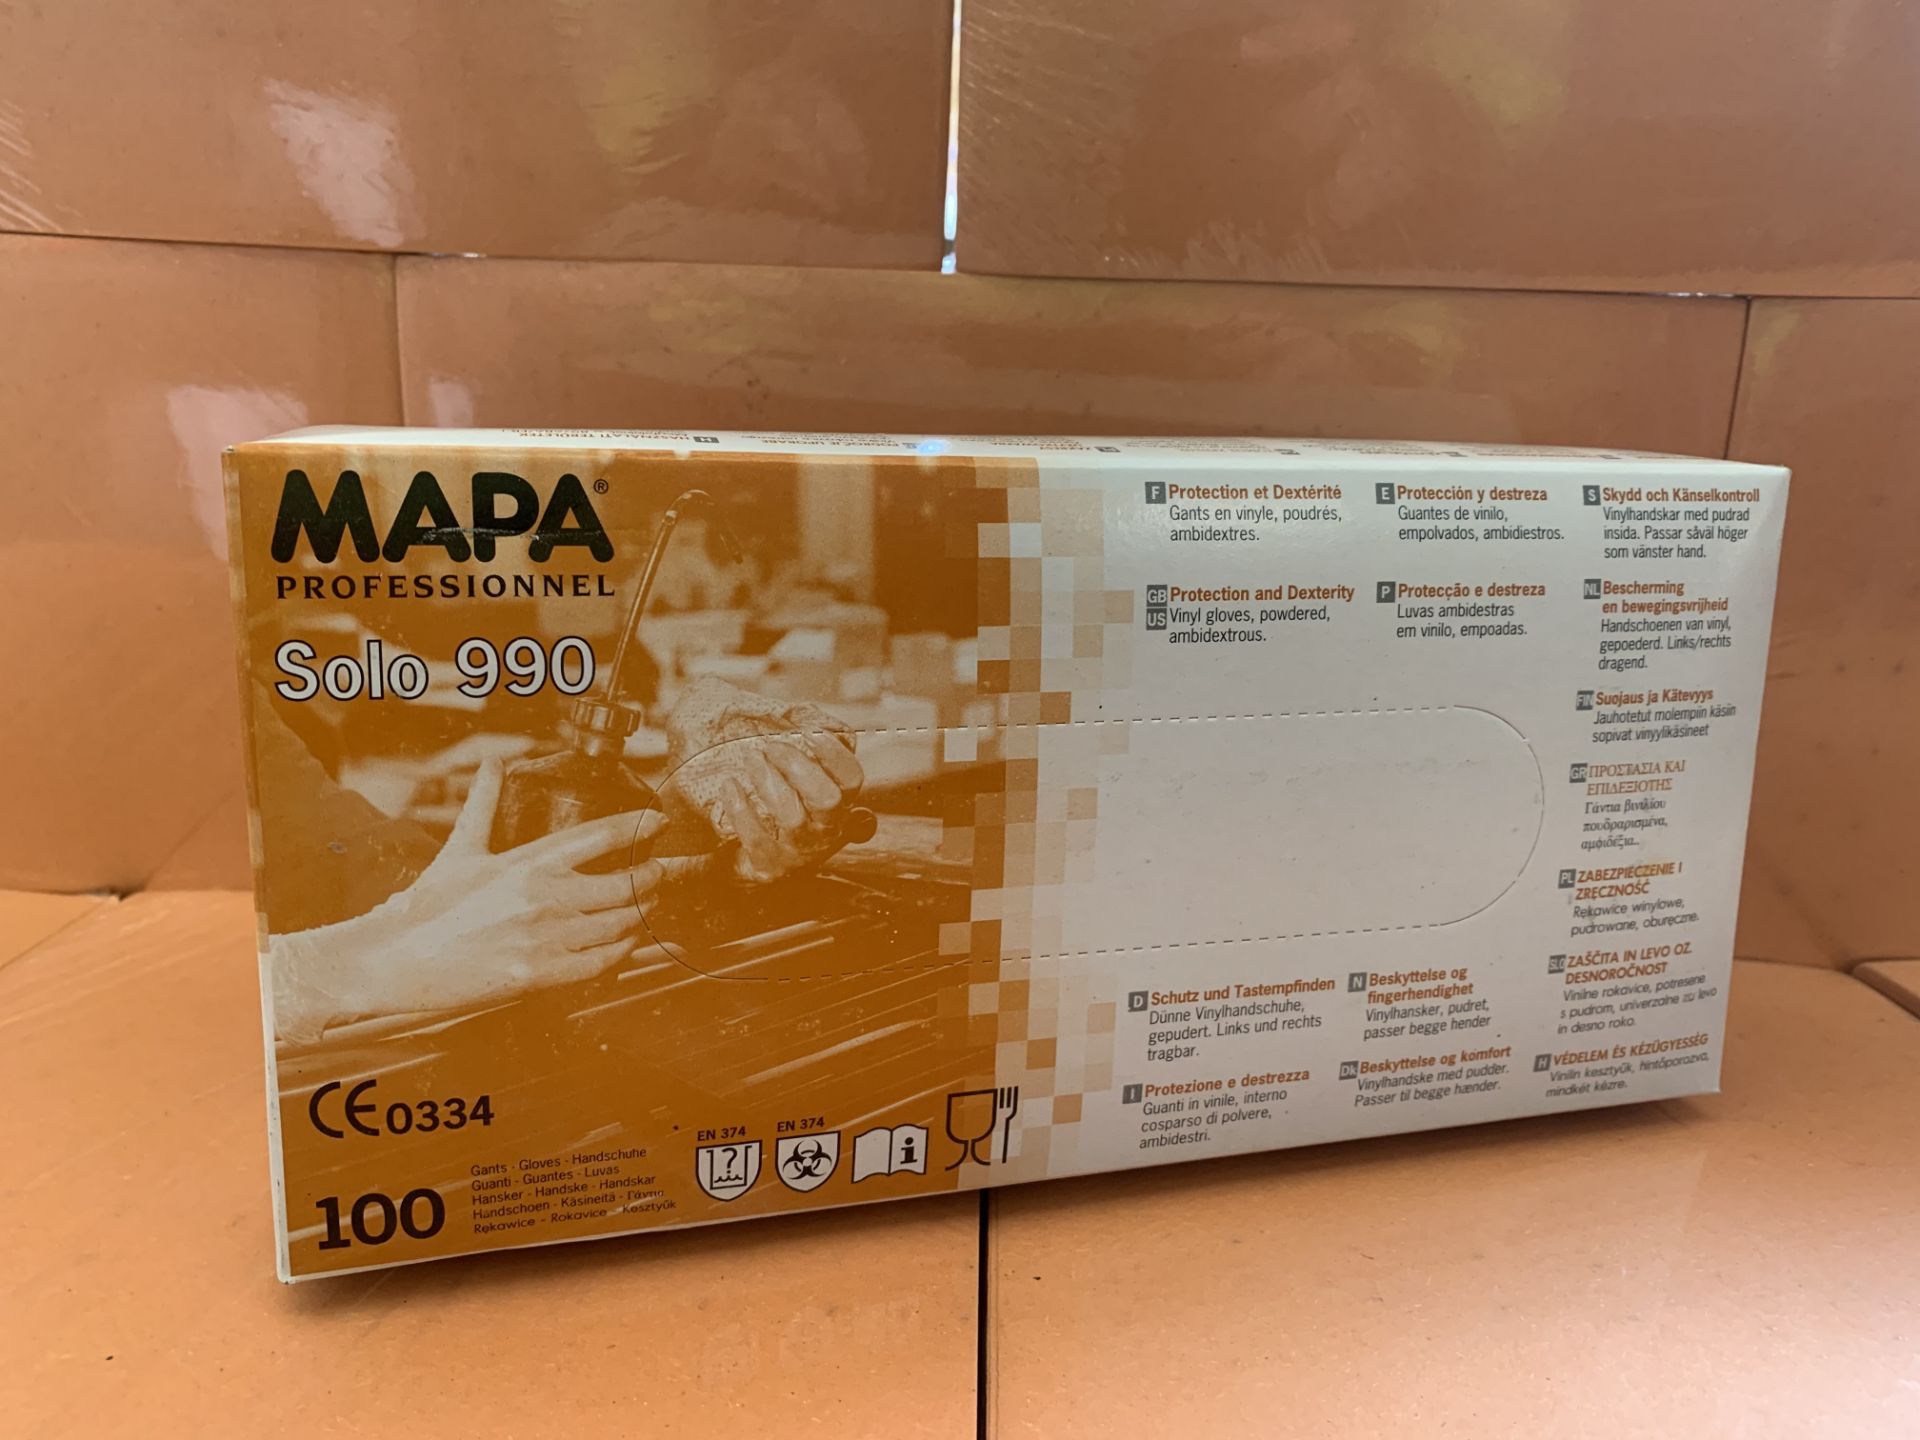 10 X PACKS OF 100 MAPA SOLO 990 PROFESSIONAL GLOVES (173/13)